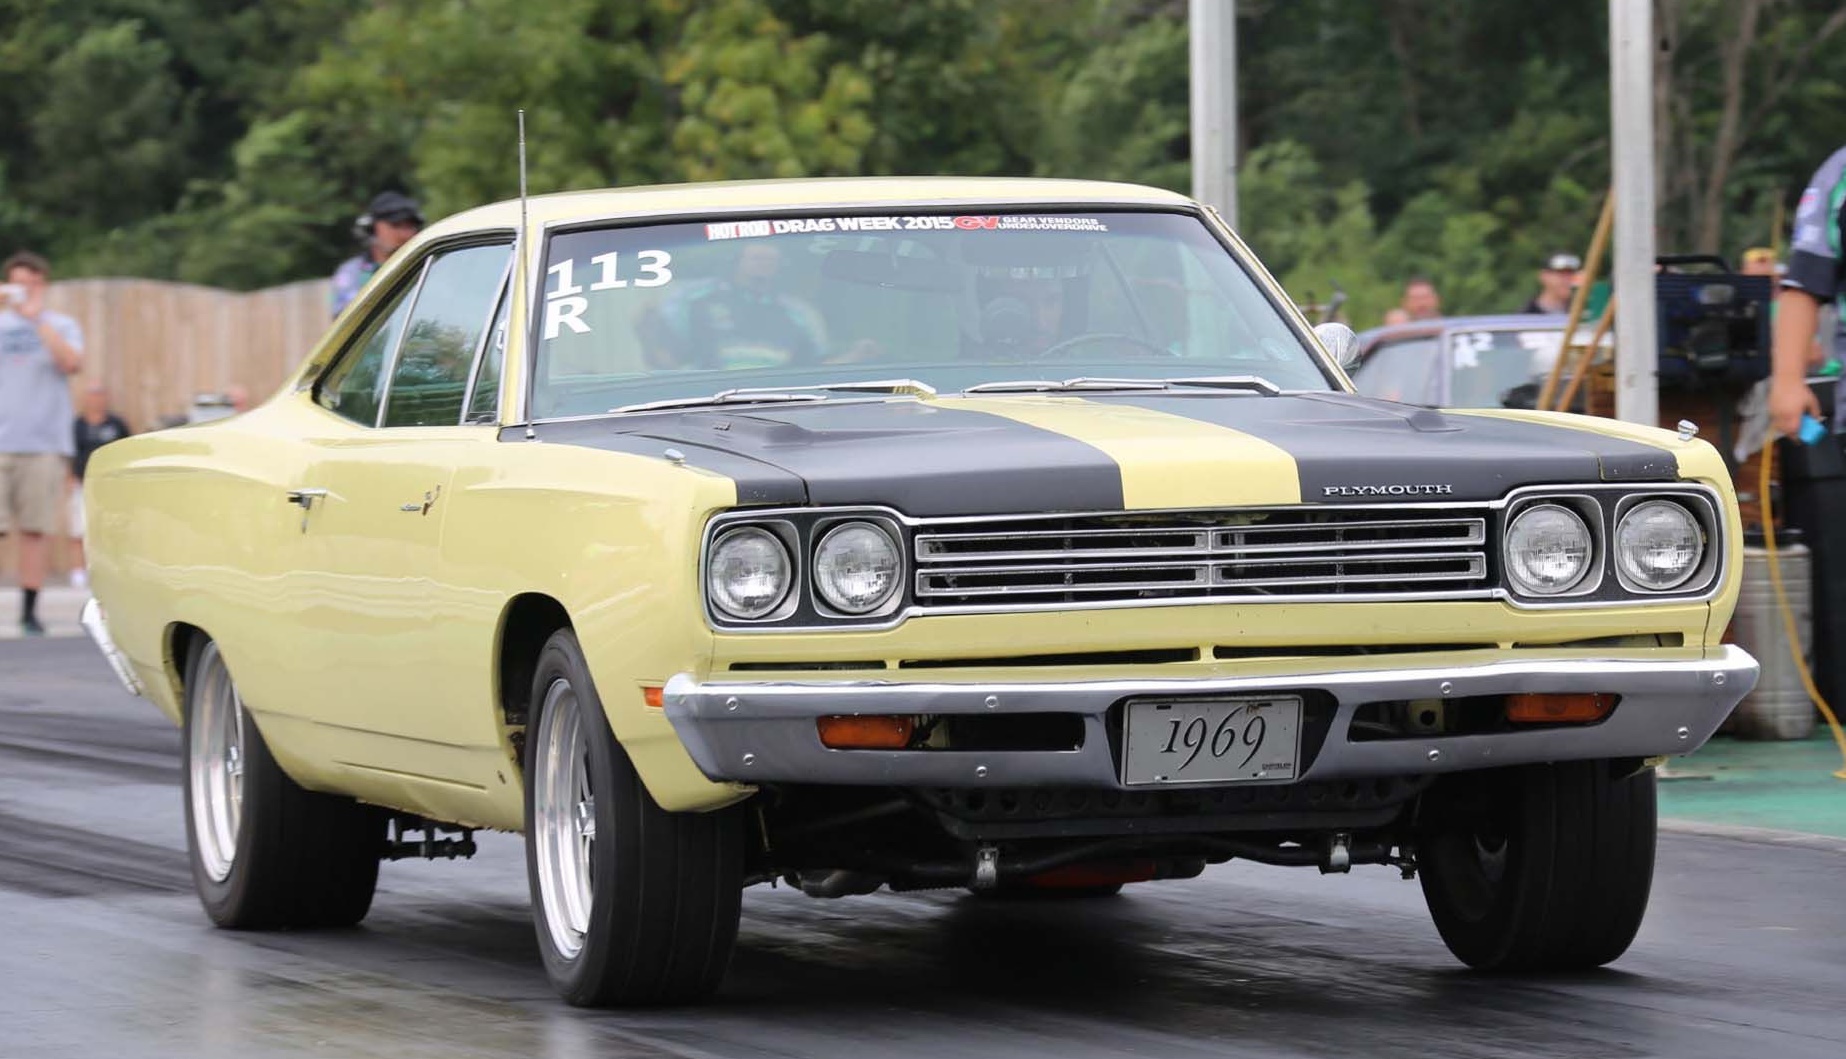 Attached picture 148-drag-week-day-4-race-cordova-lpr.jpg